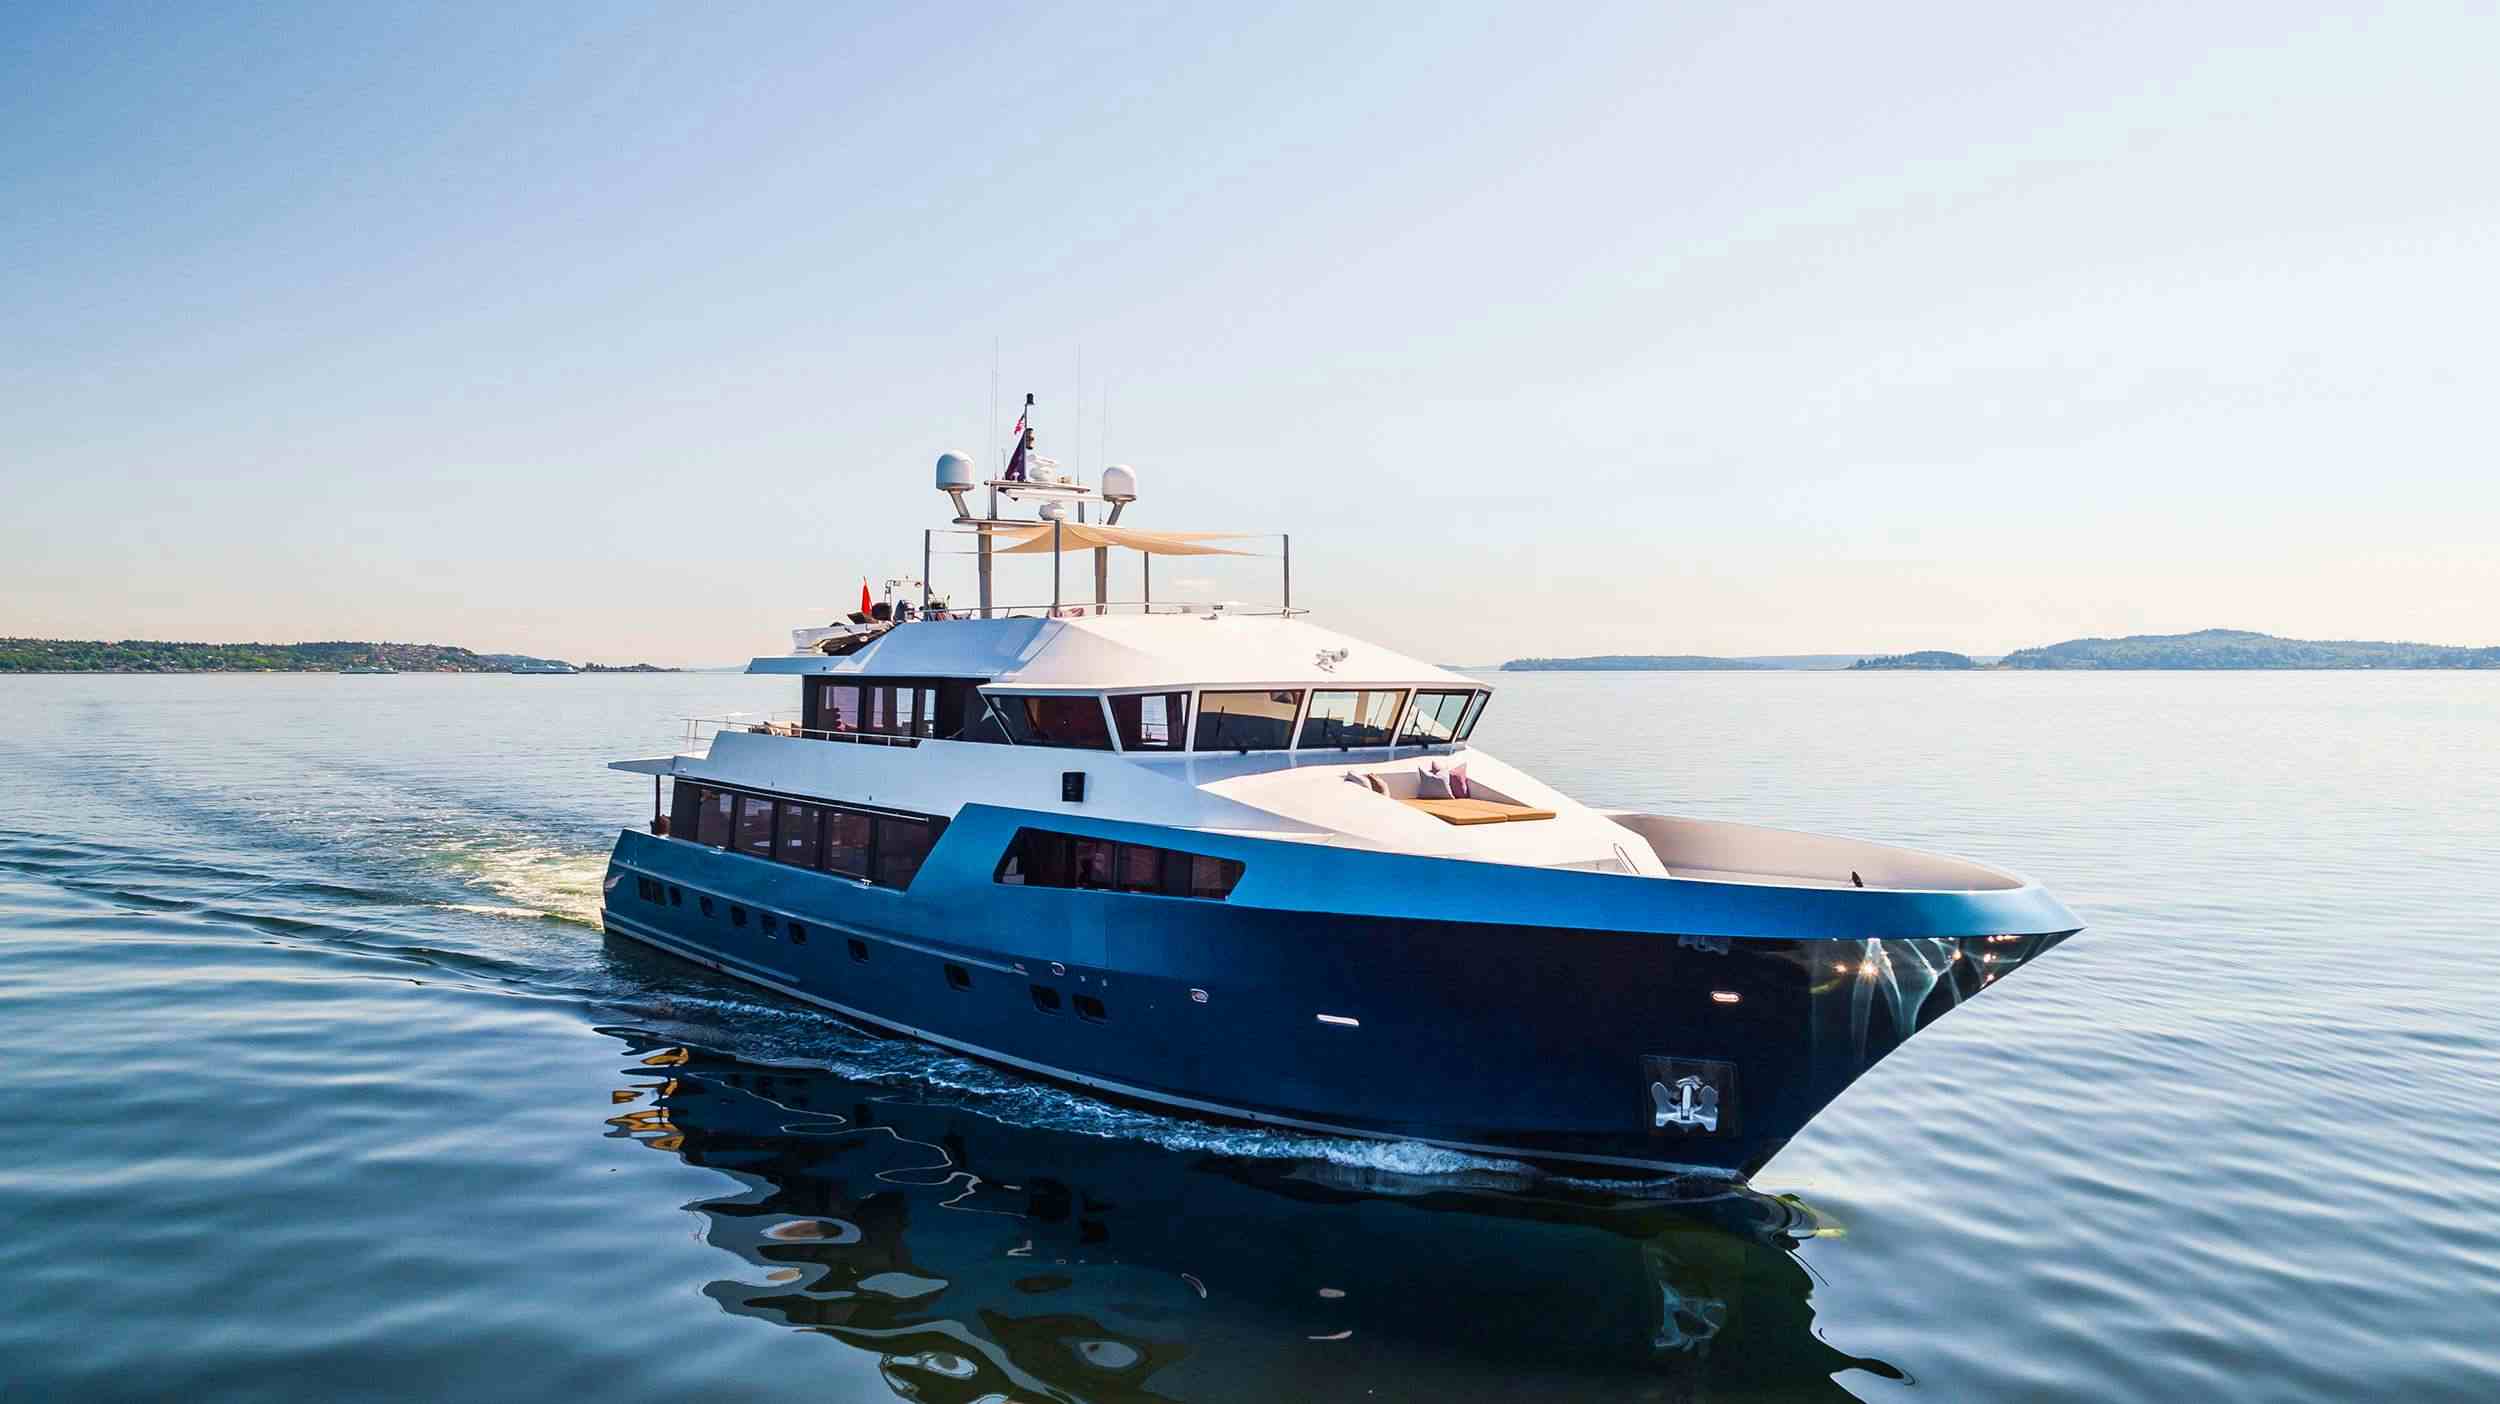 ASCENTE - Yacht Charter Nanaimo & Boat hire in Pacific North West & Canada 1